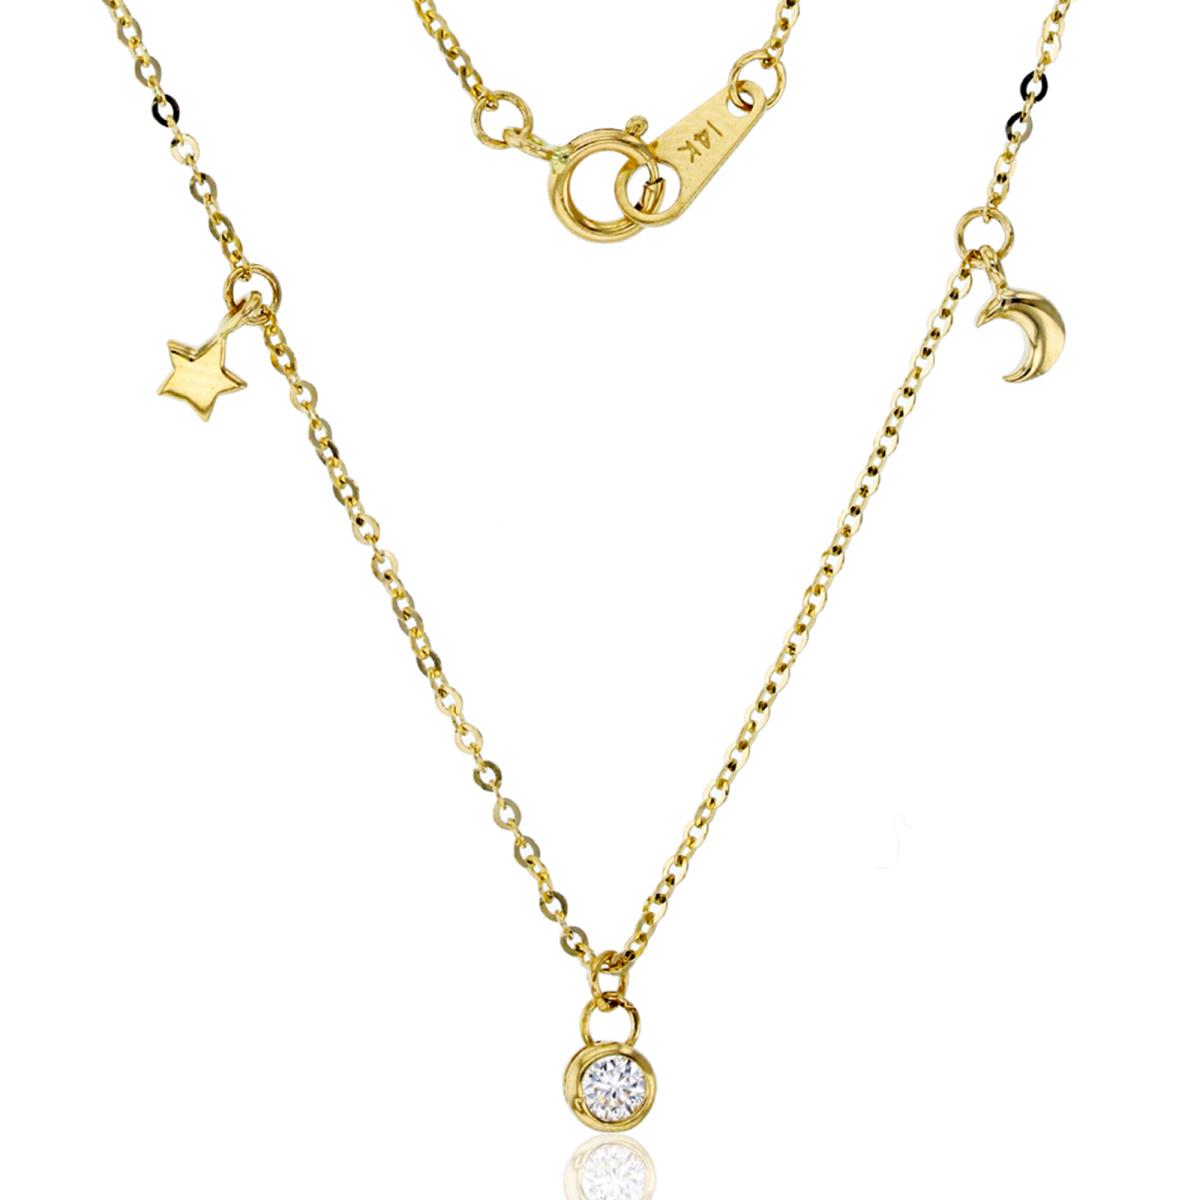 14K Yellow Gold Polished Dangling Moon, Star & Bezel CZ 16" Necklace